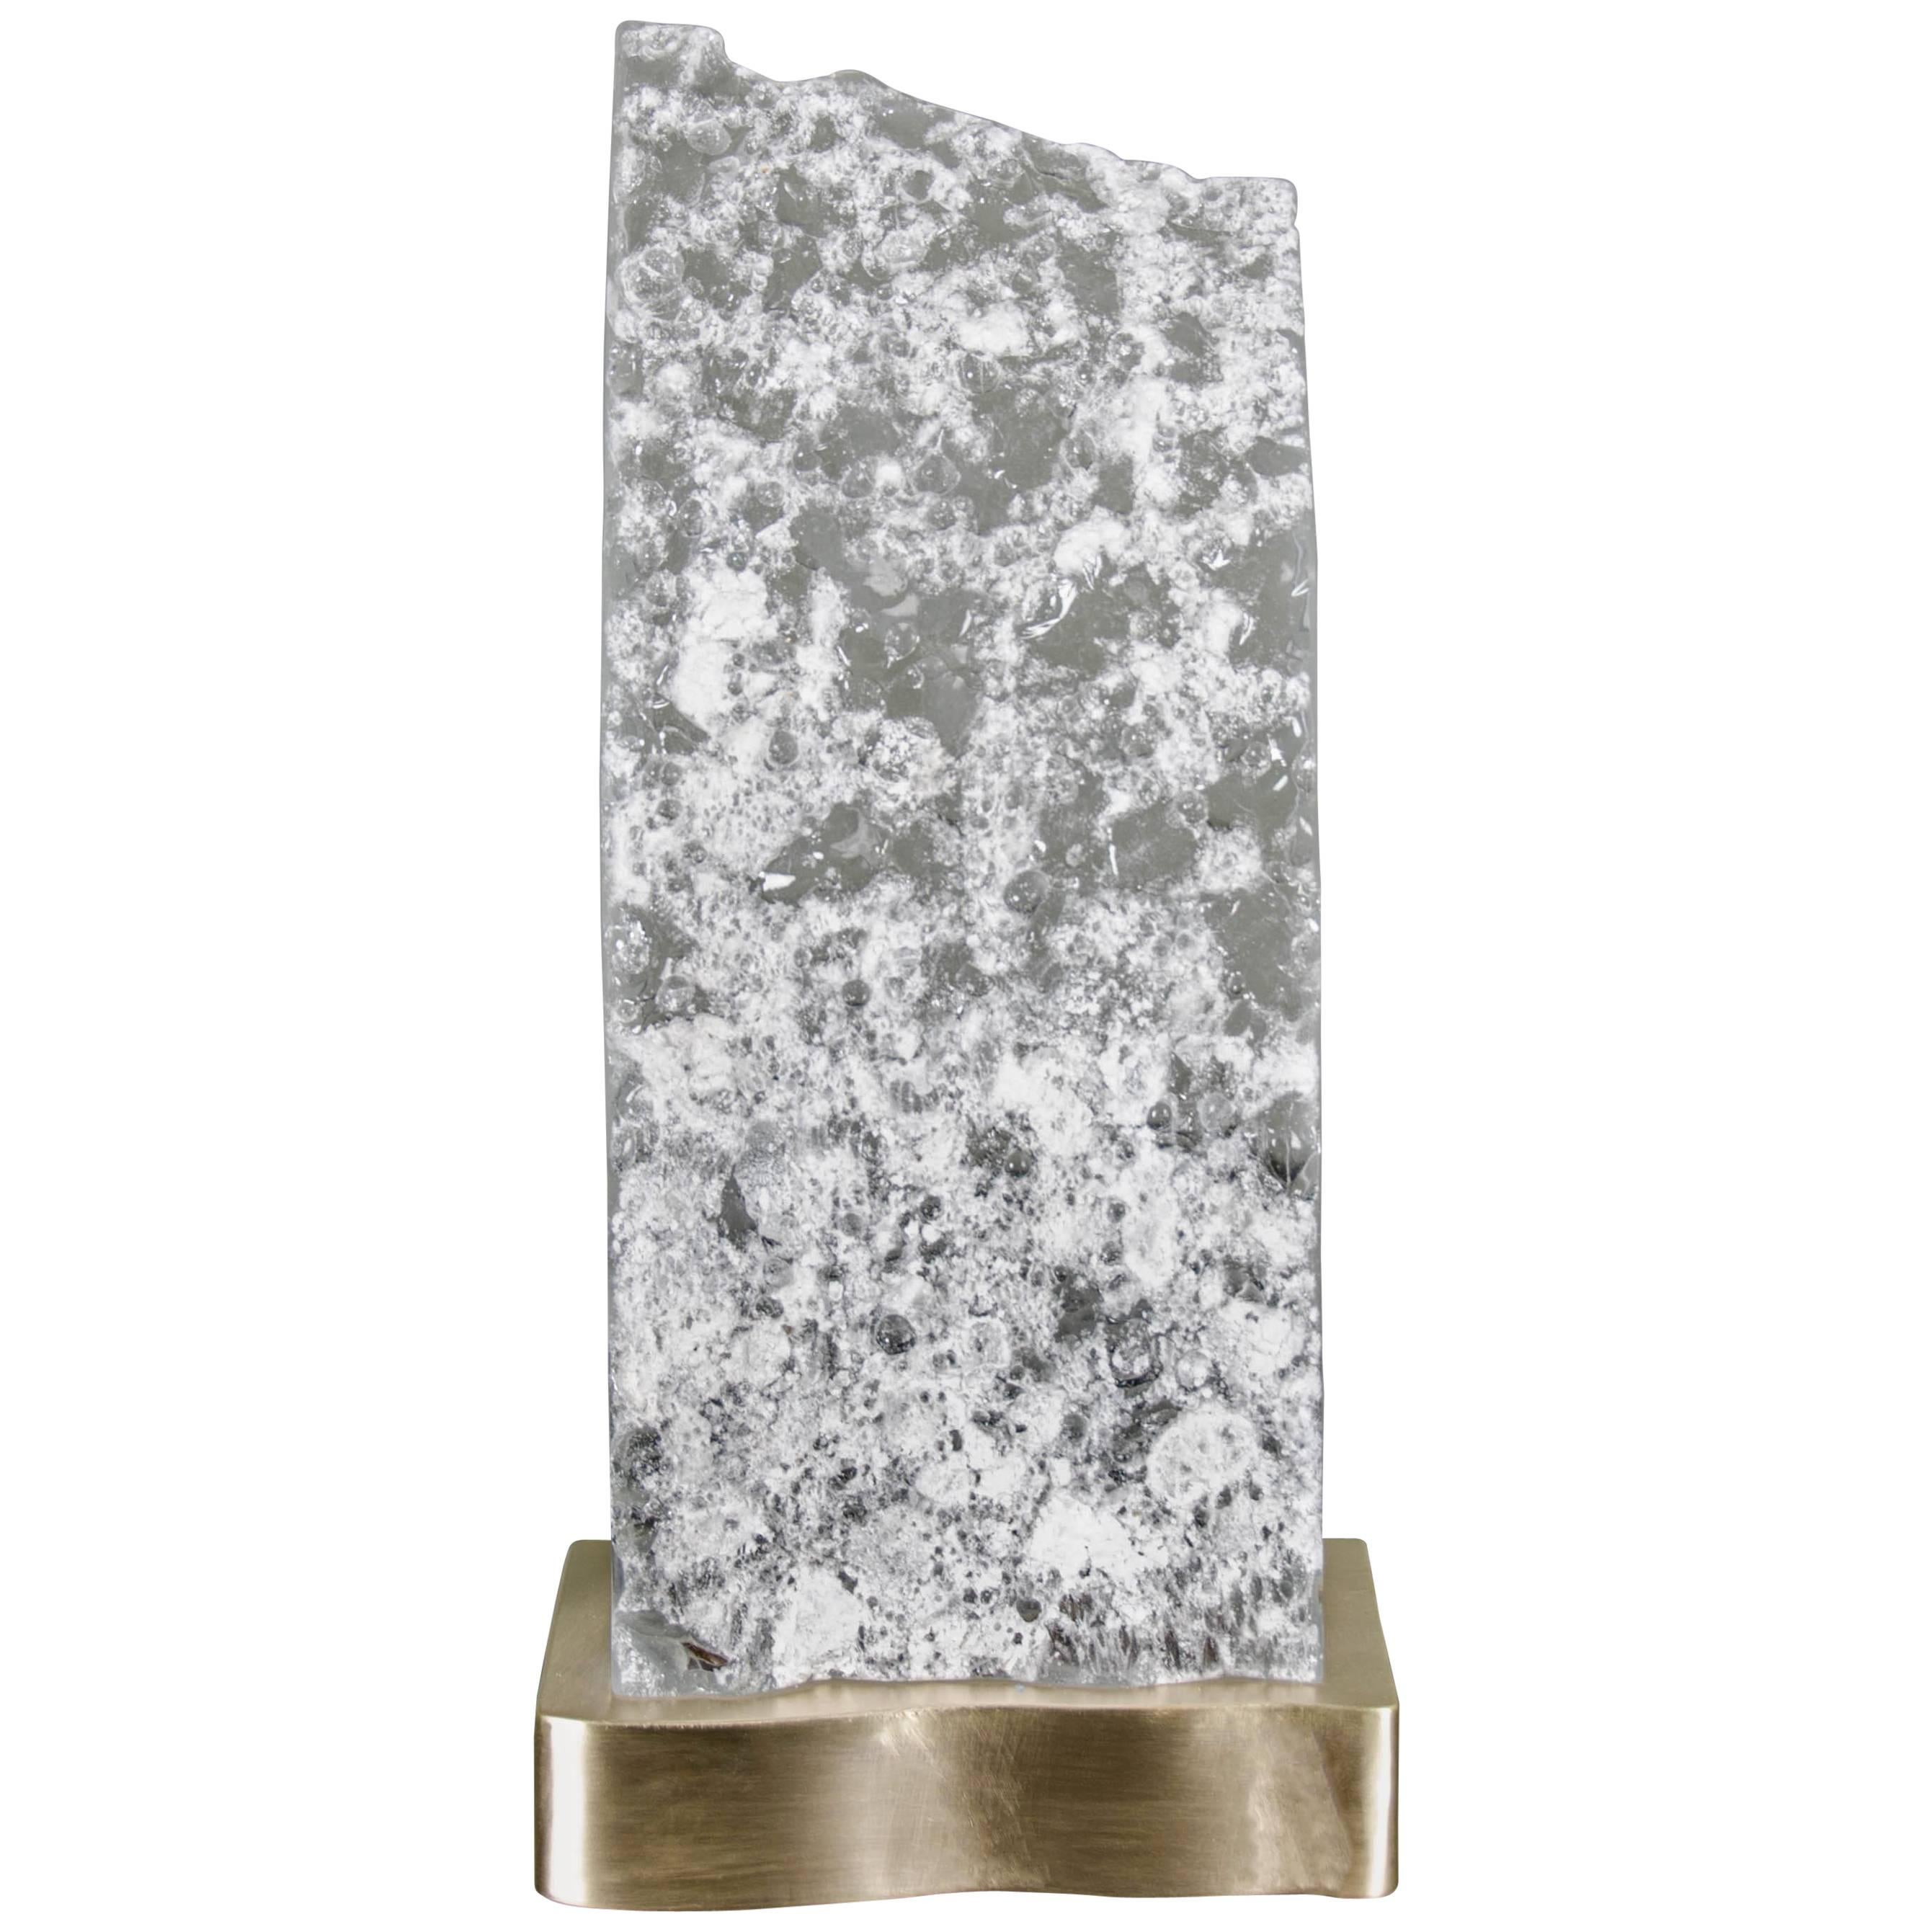 High Meru Light, Crystal and Brass by Robert Kuo, Limited Edition